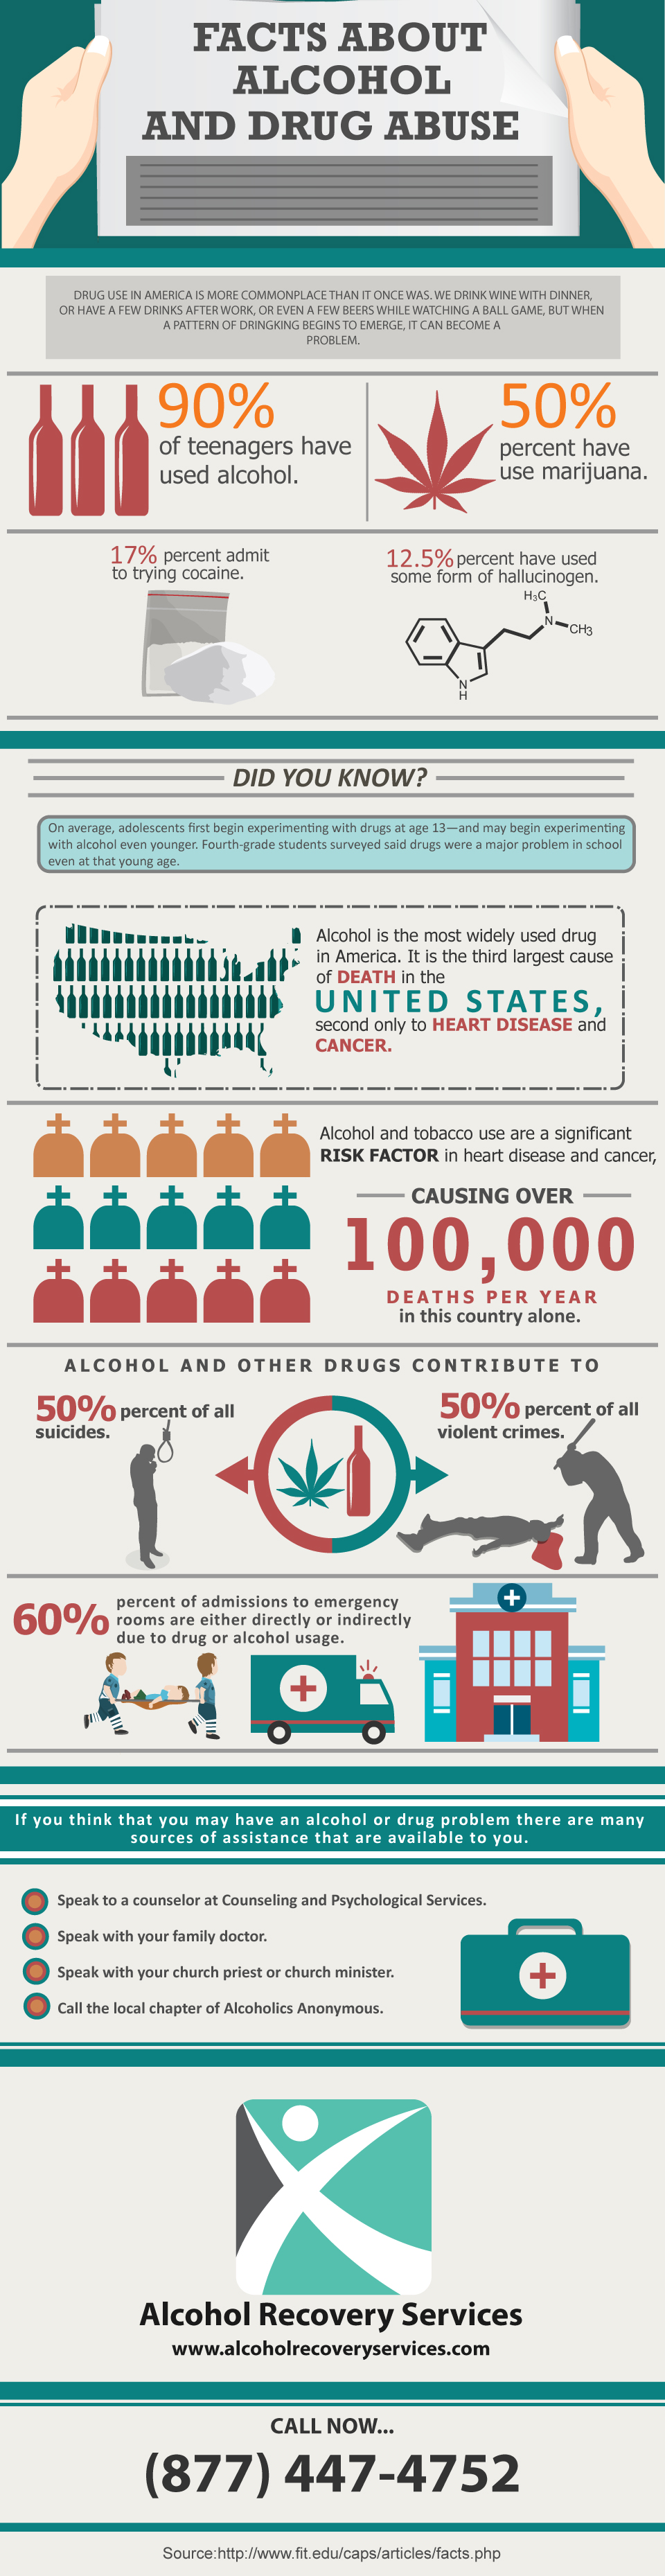 Facts about Alcohol and Drug Abuse